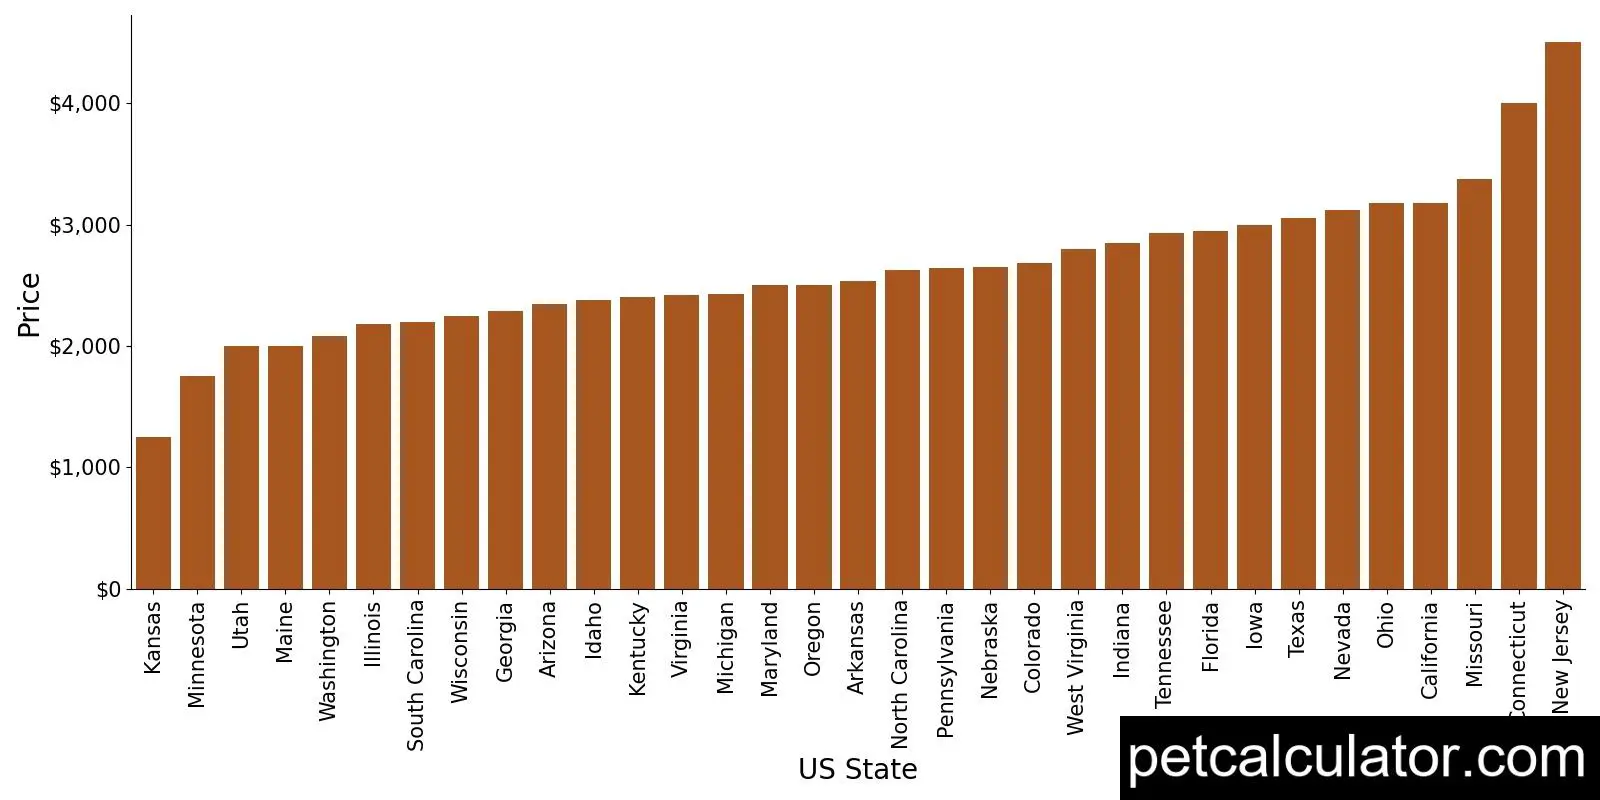 Price of English Golden Retrievers by US State 